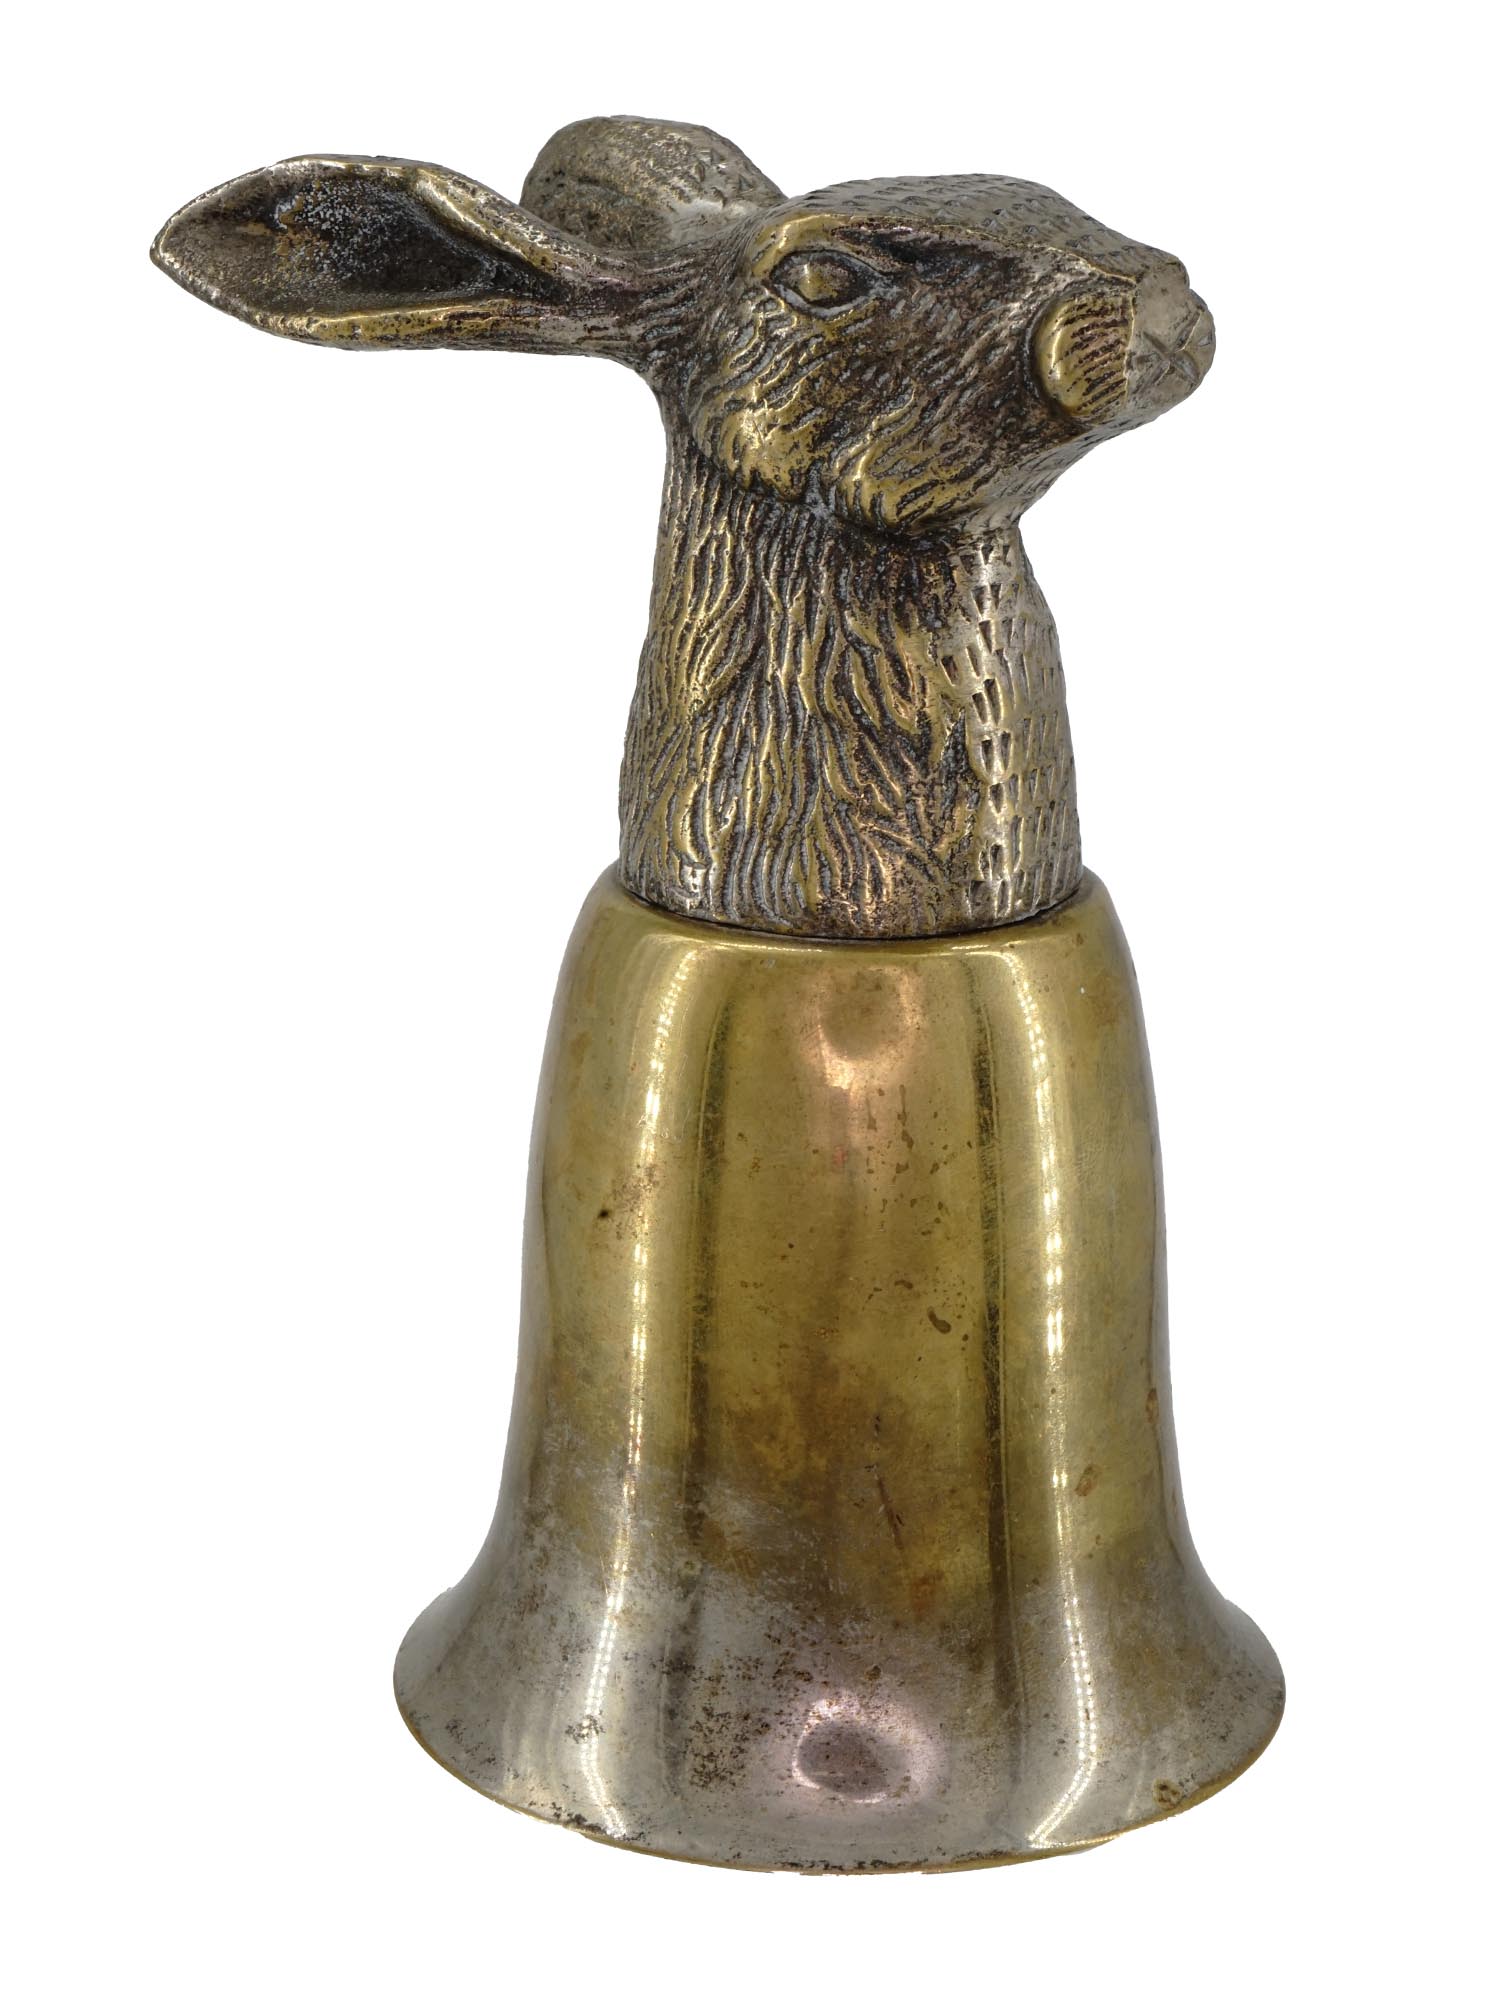 SILVER PLATED BRASS STIRRUP CUP WITH RABBIT HEAD PIC-0